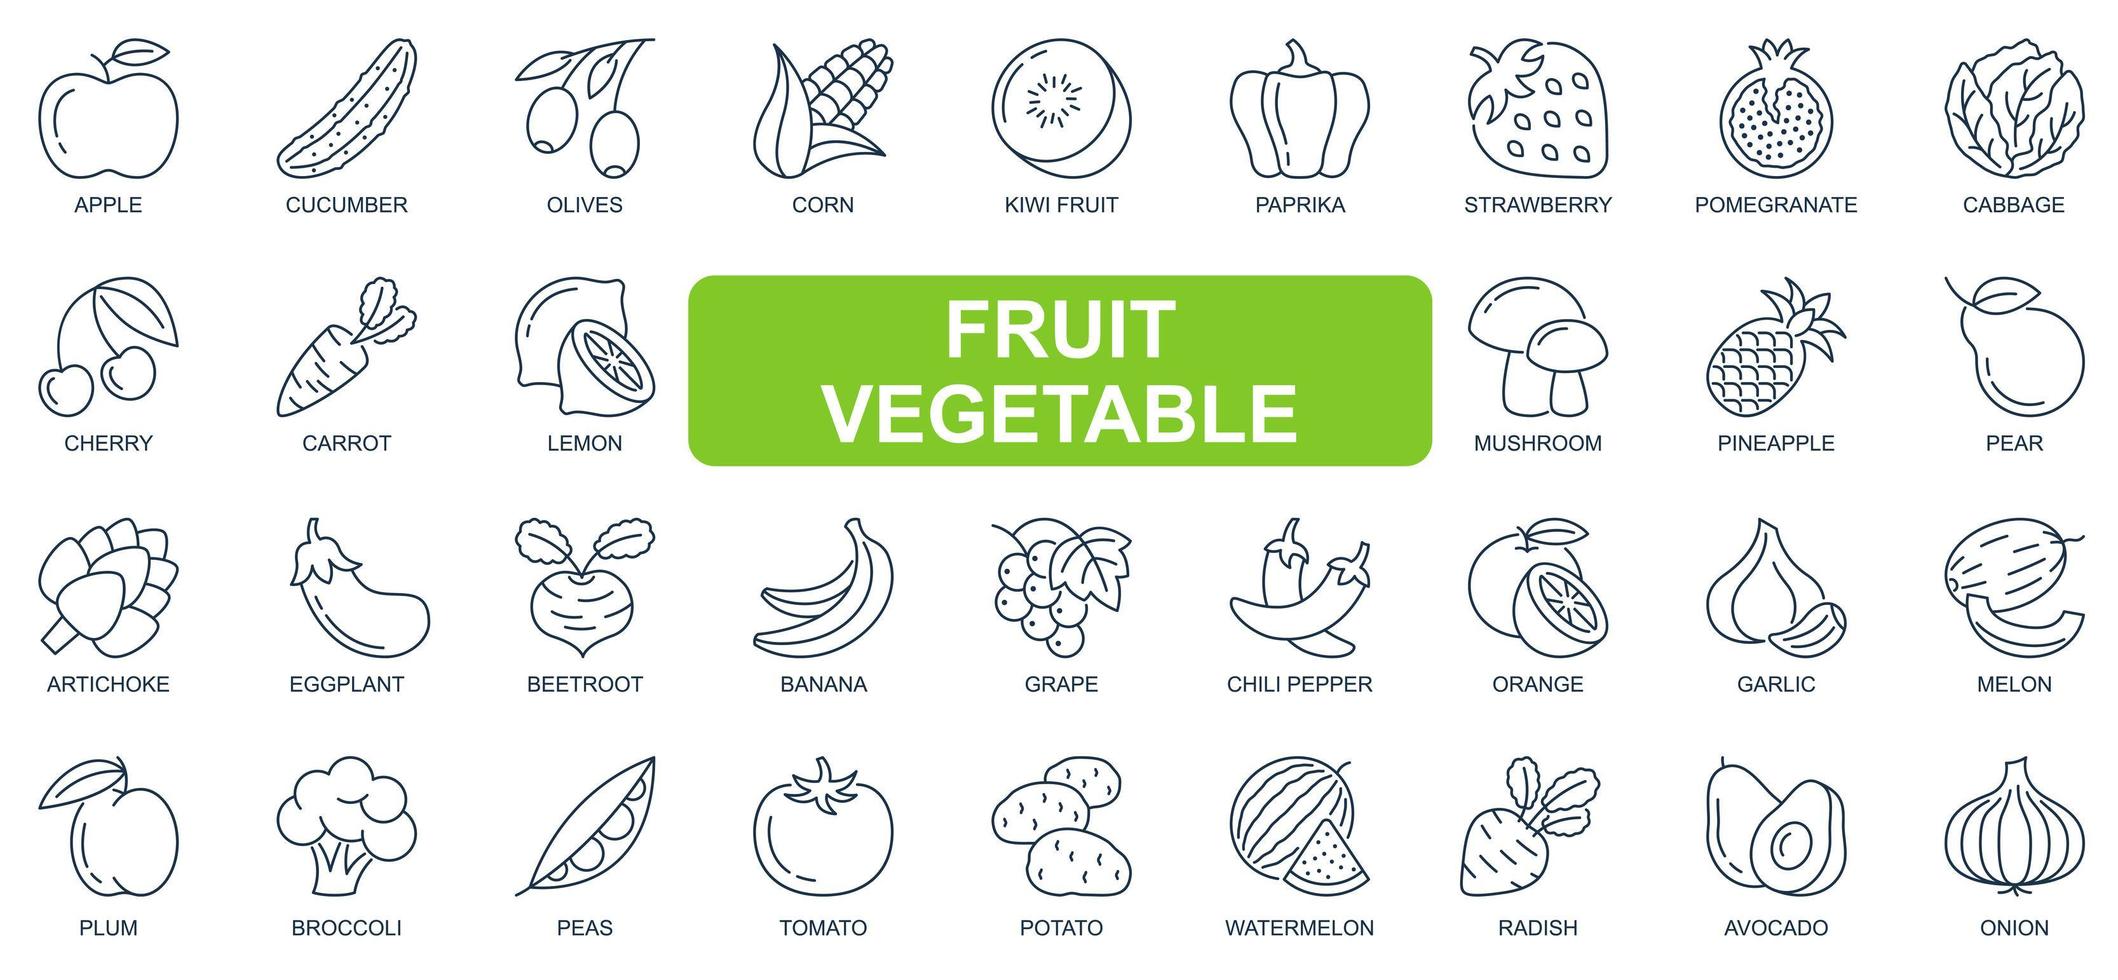 Fruit and vegetable concept simple line icons set. Pack outline pictograms of apple, cucumber, banana, carrot, tomato, potato, watermelon and other. Vector symbols for website and mobile app design